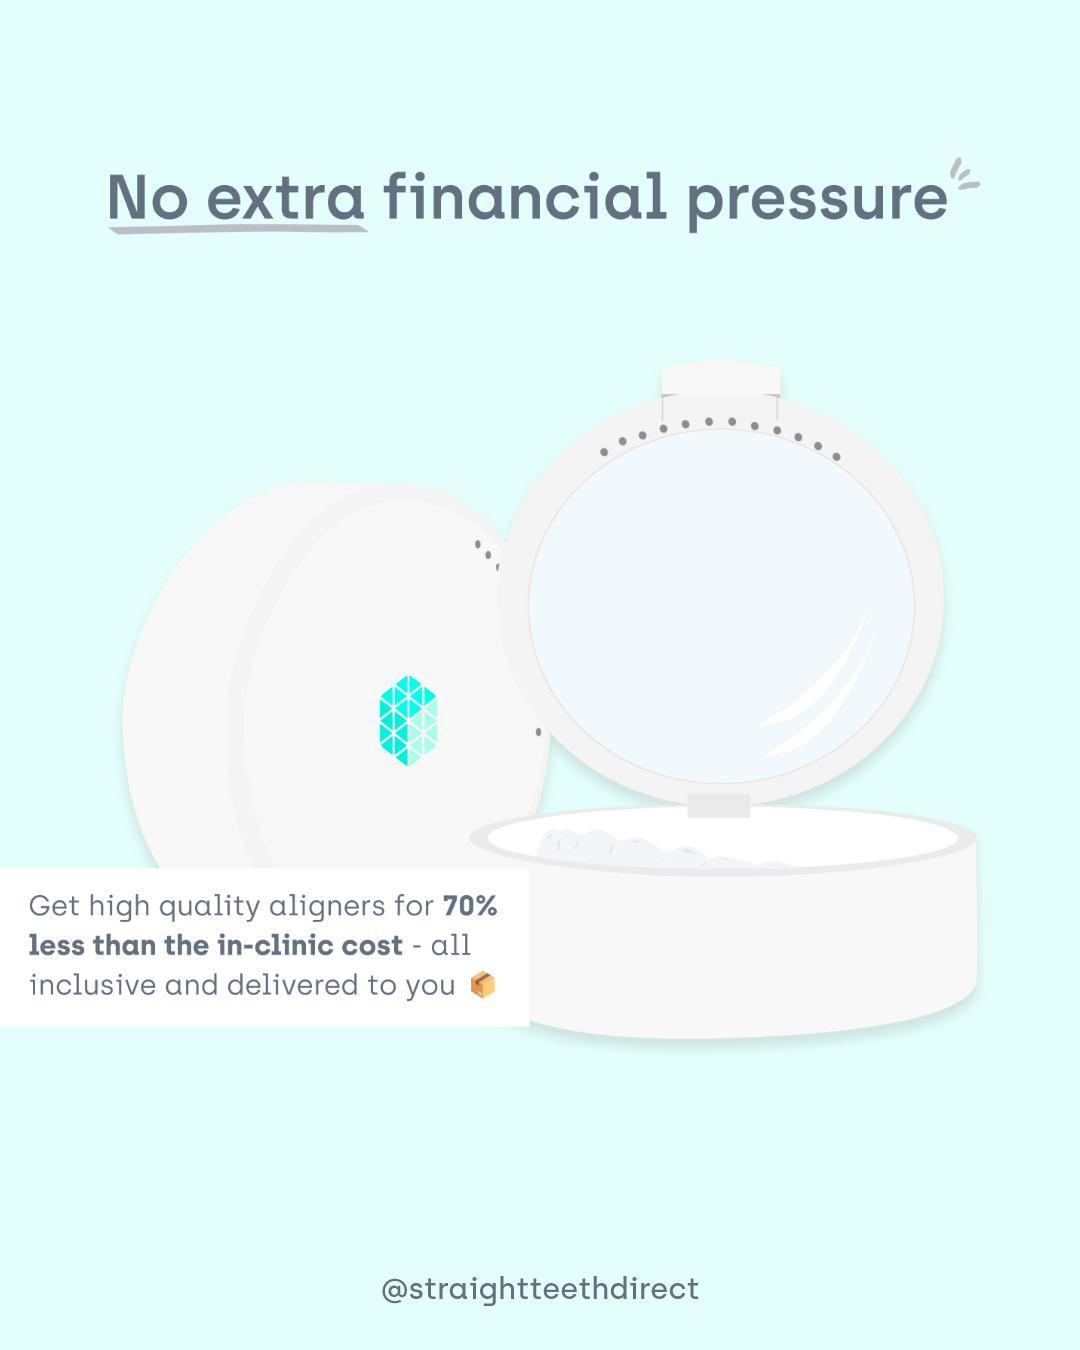 Clear aligners don't add extra financial pressure